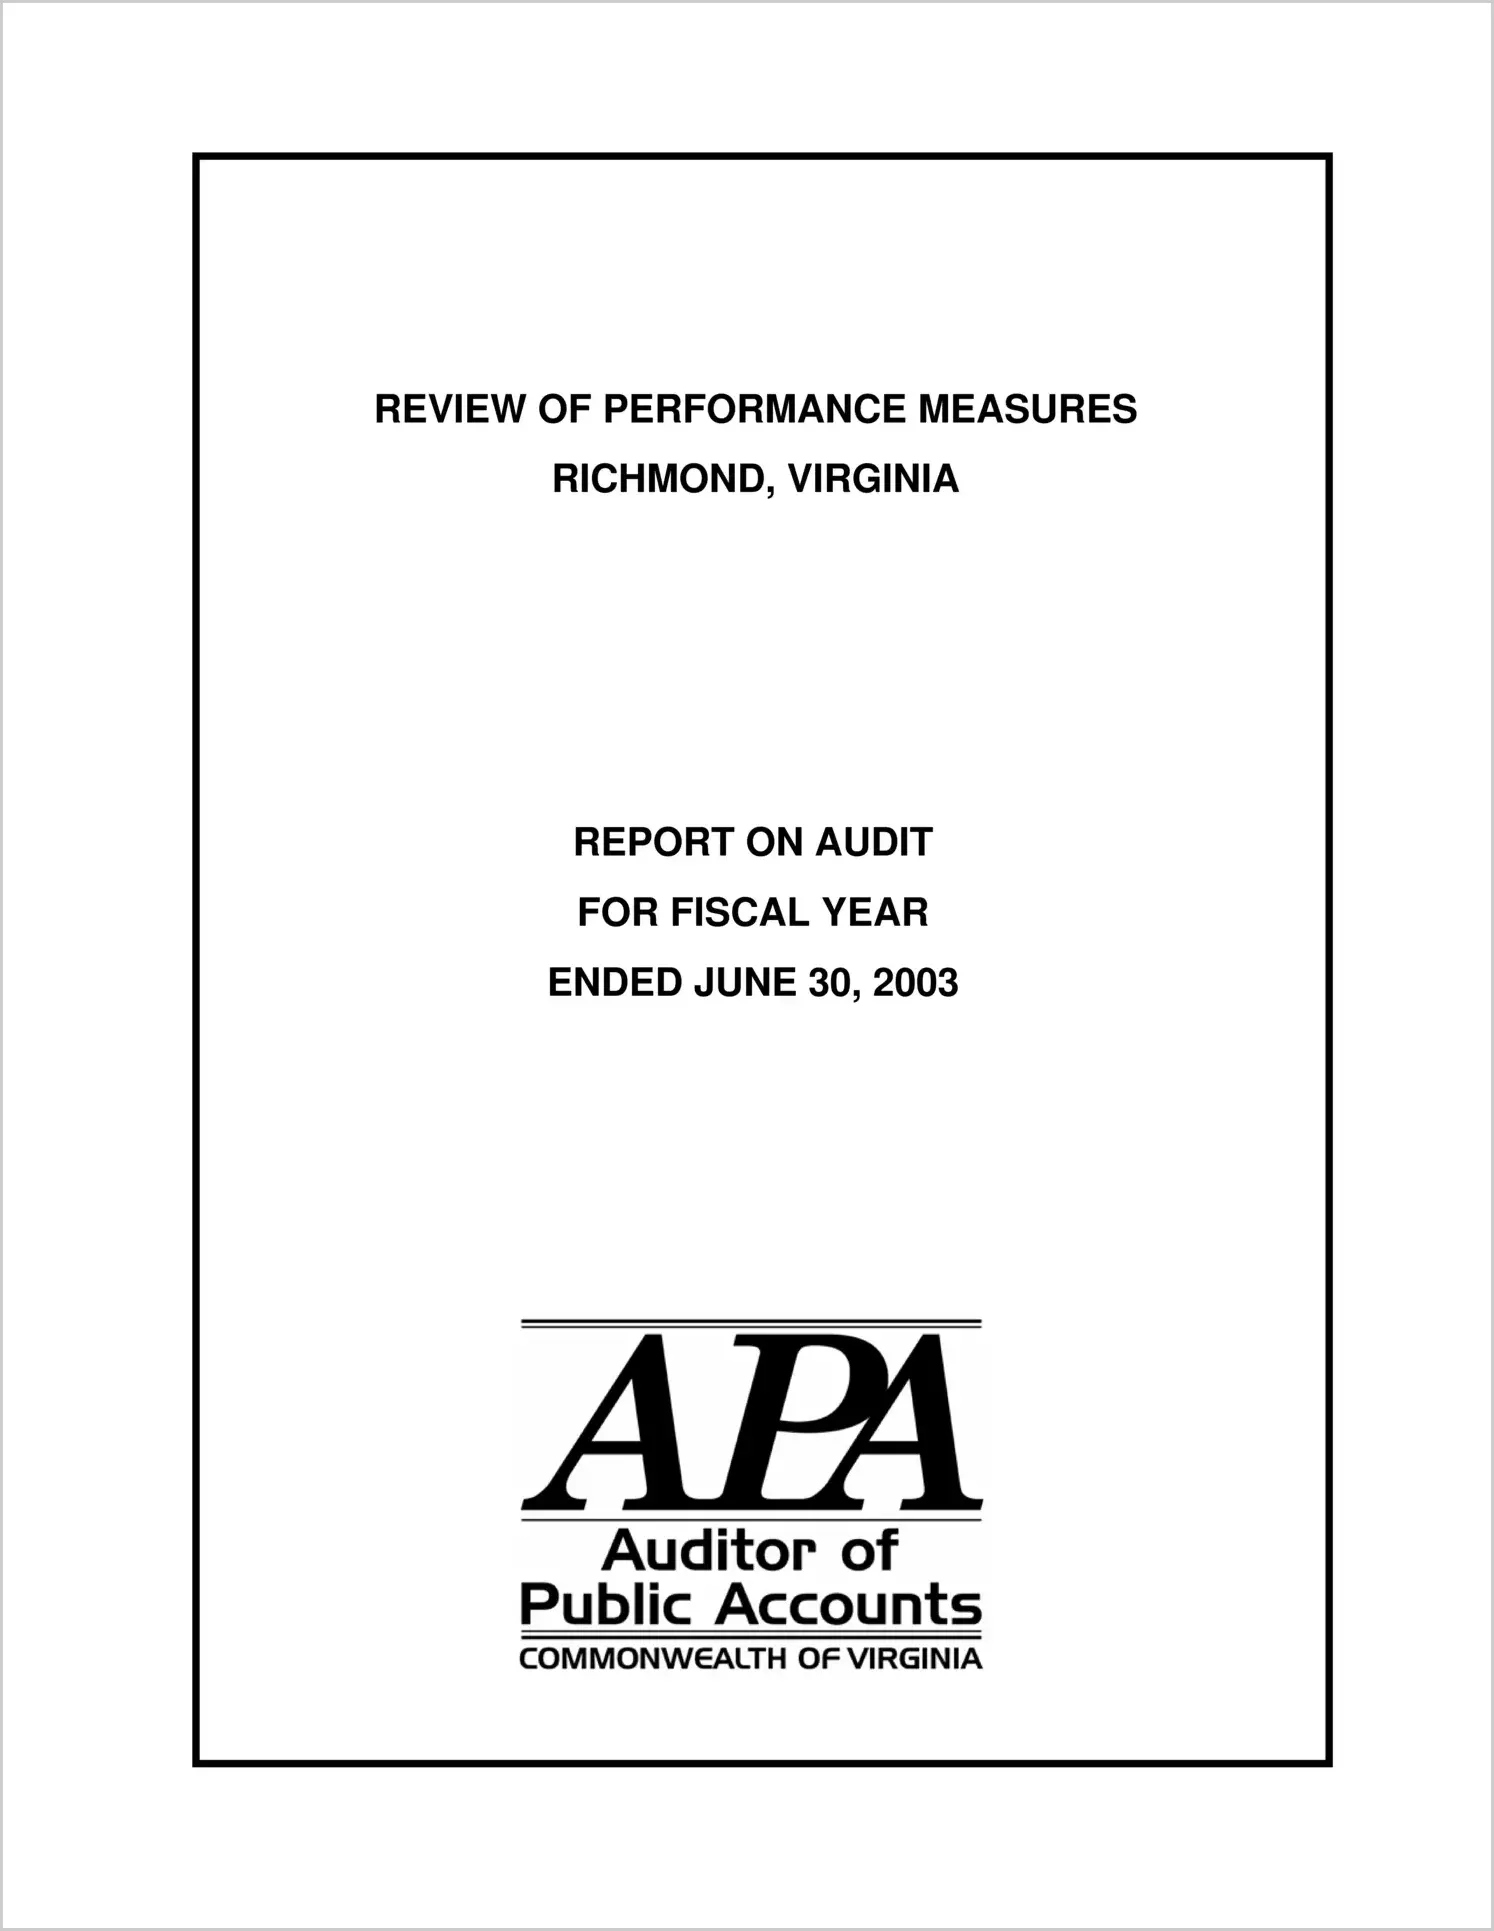 Review of Performance Measures for the Fiscal Year Ended June 30, 2003